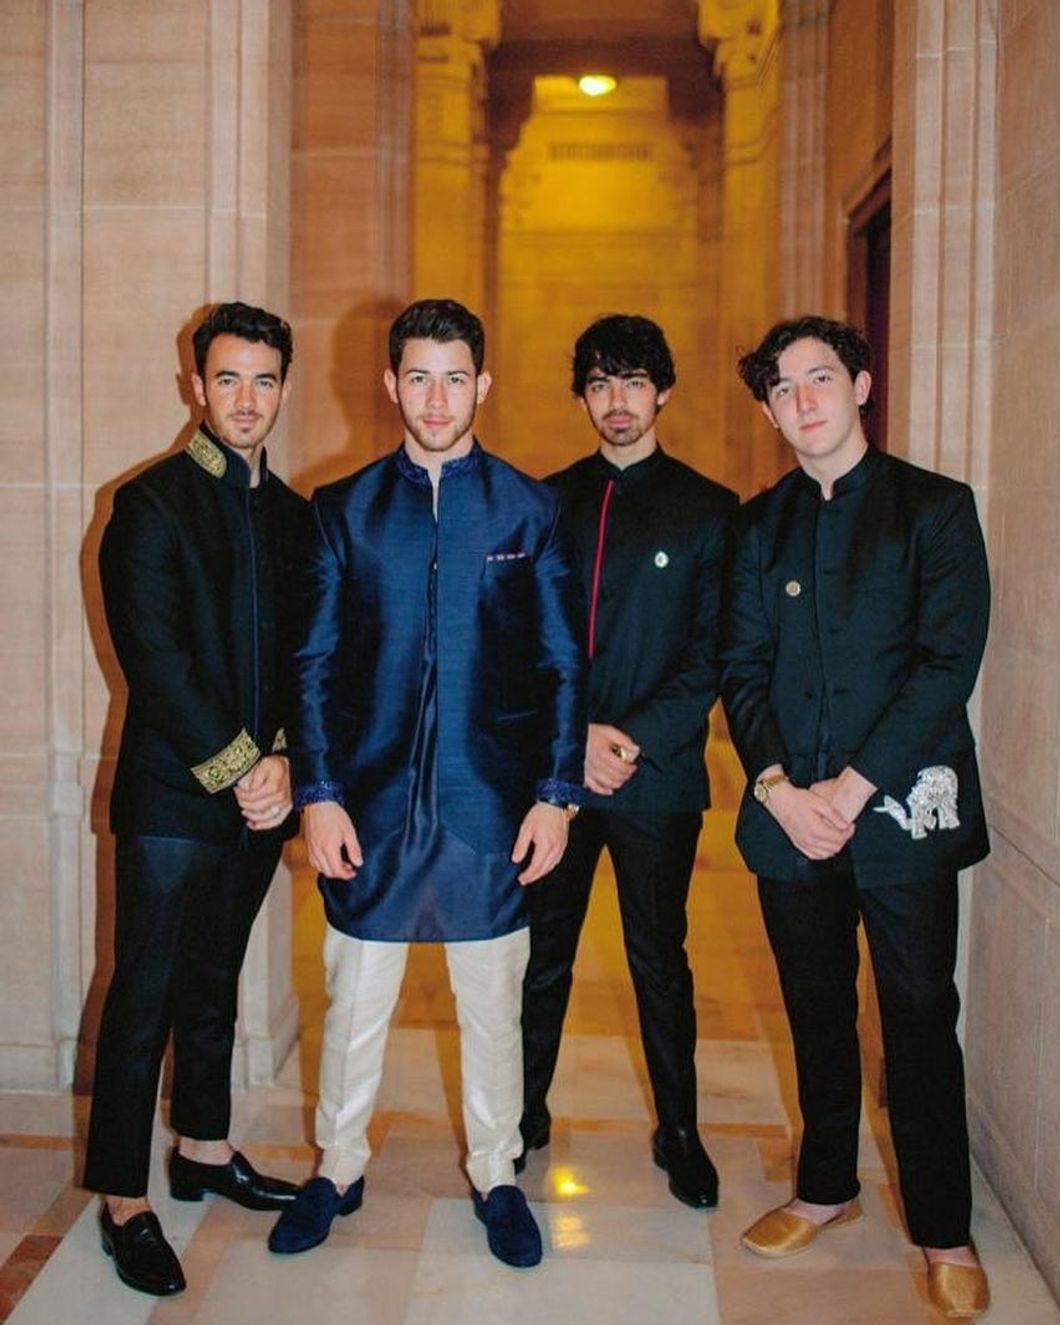 15 Jonas Brothers Songs To Get Your Heartbroken 12-Year-Old Self Through Nick Jonas Tying The Knot